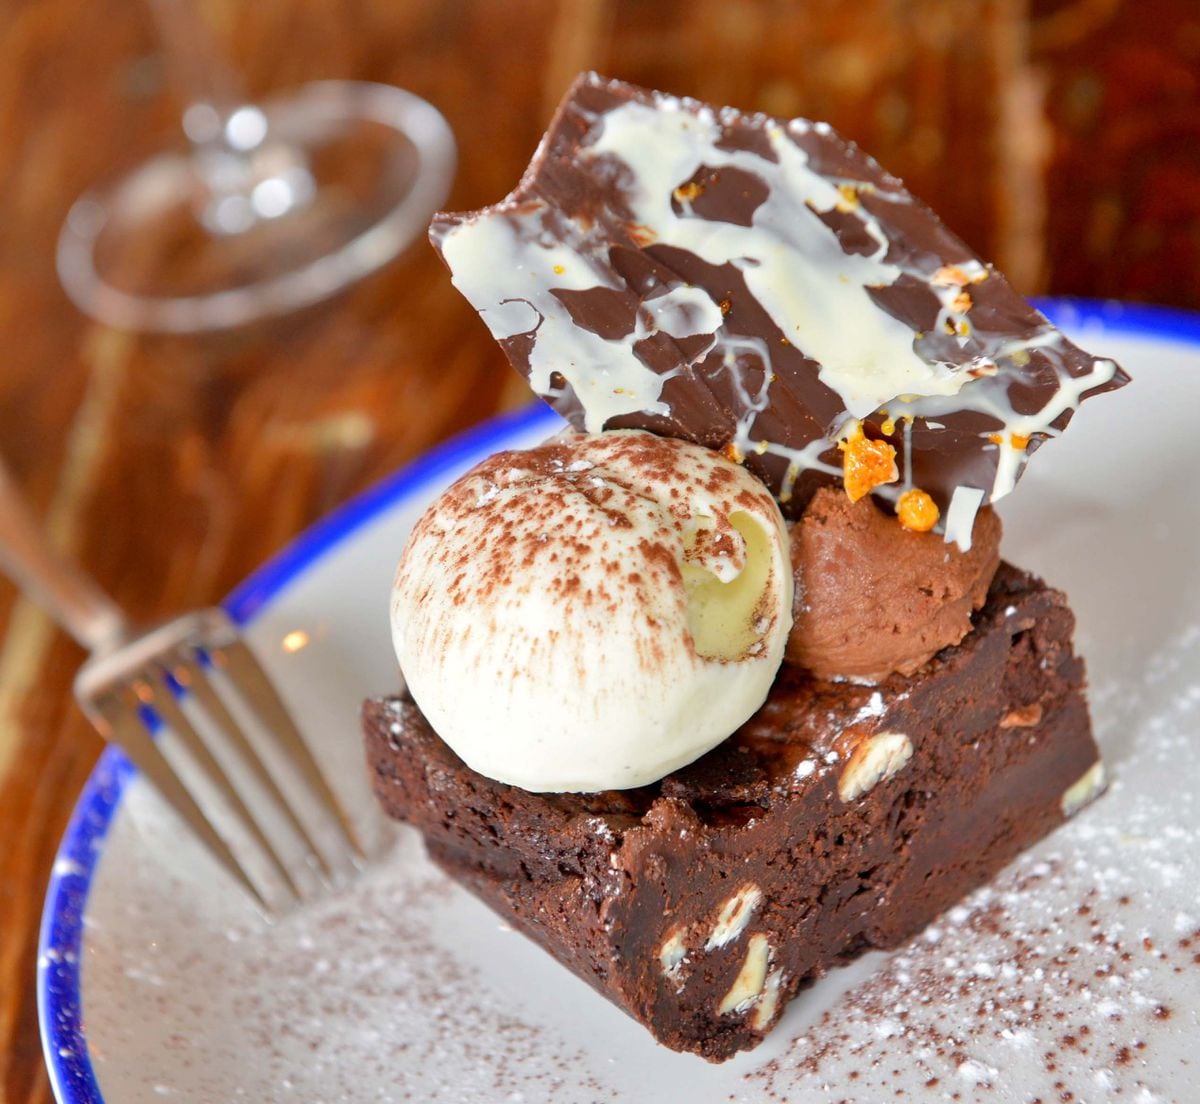 Smooth and rich – the chocolate brownie